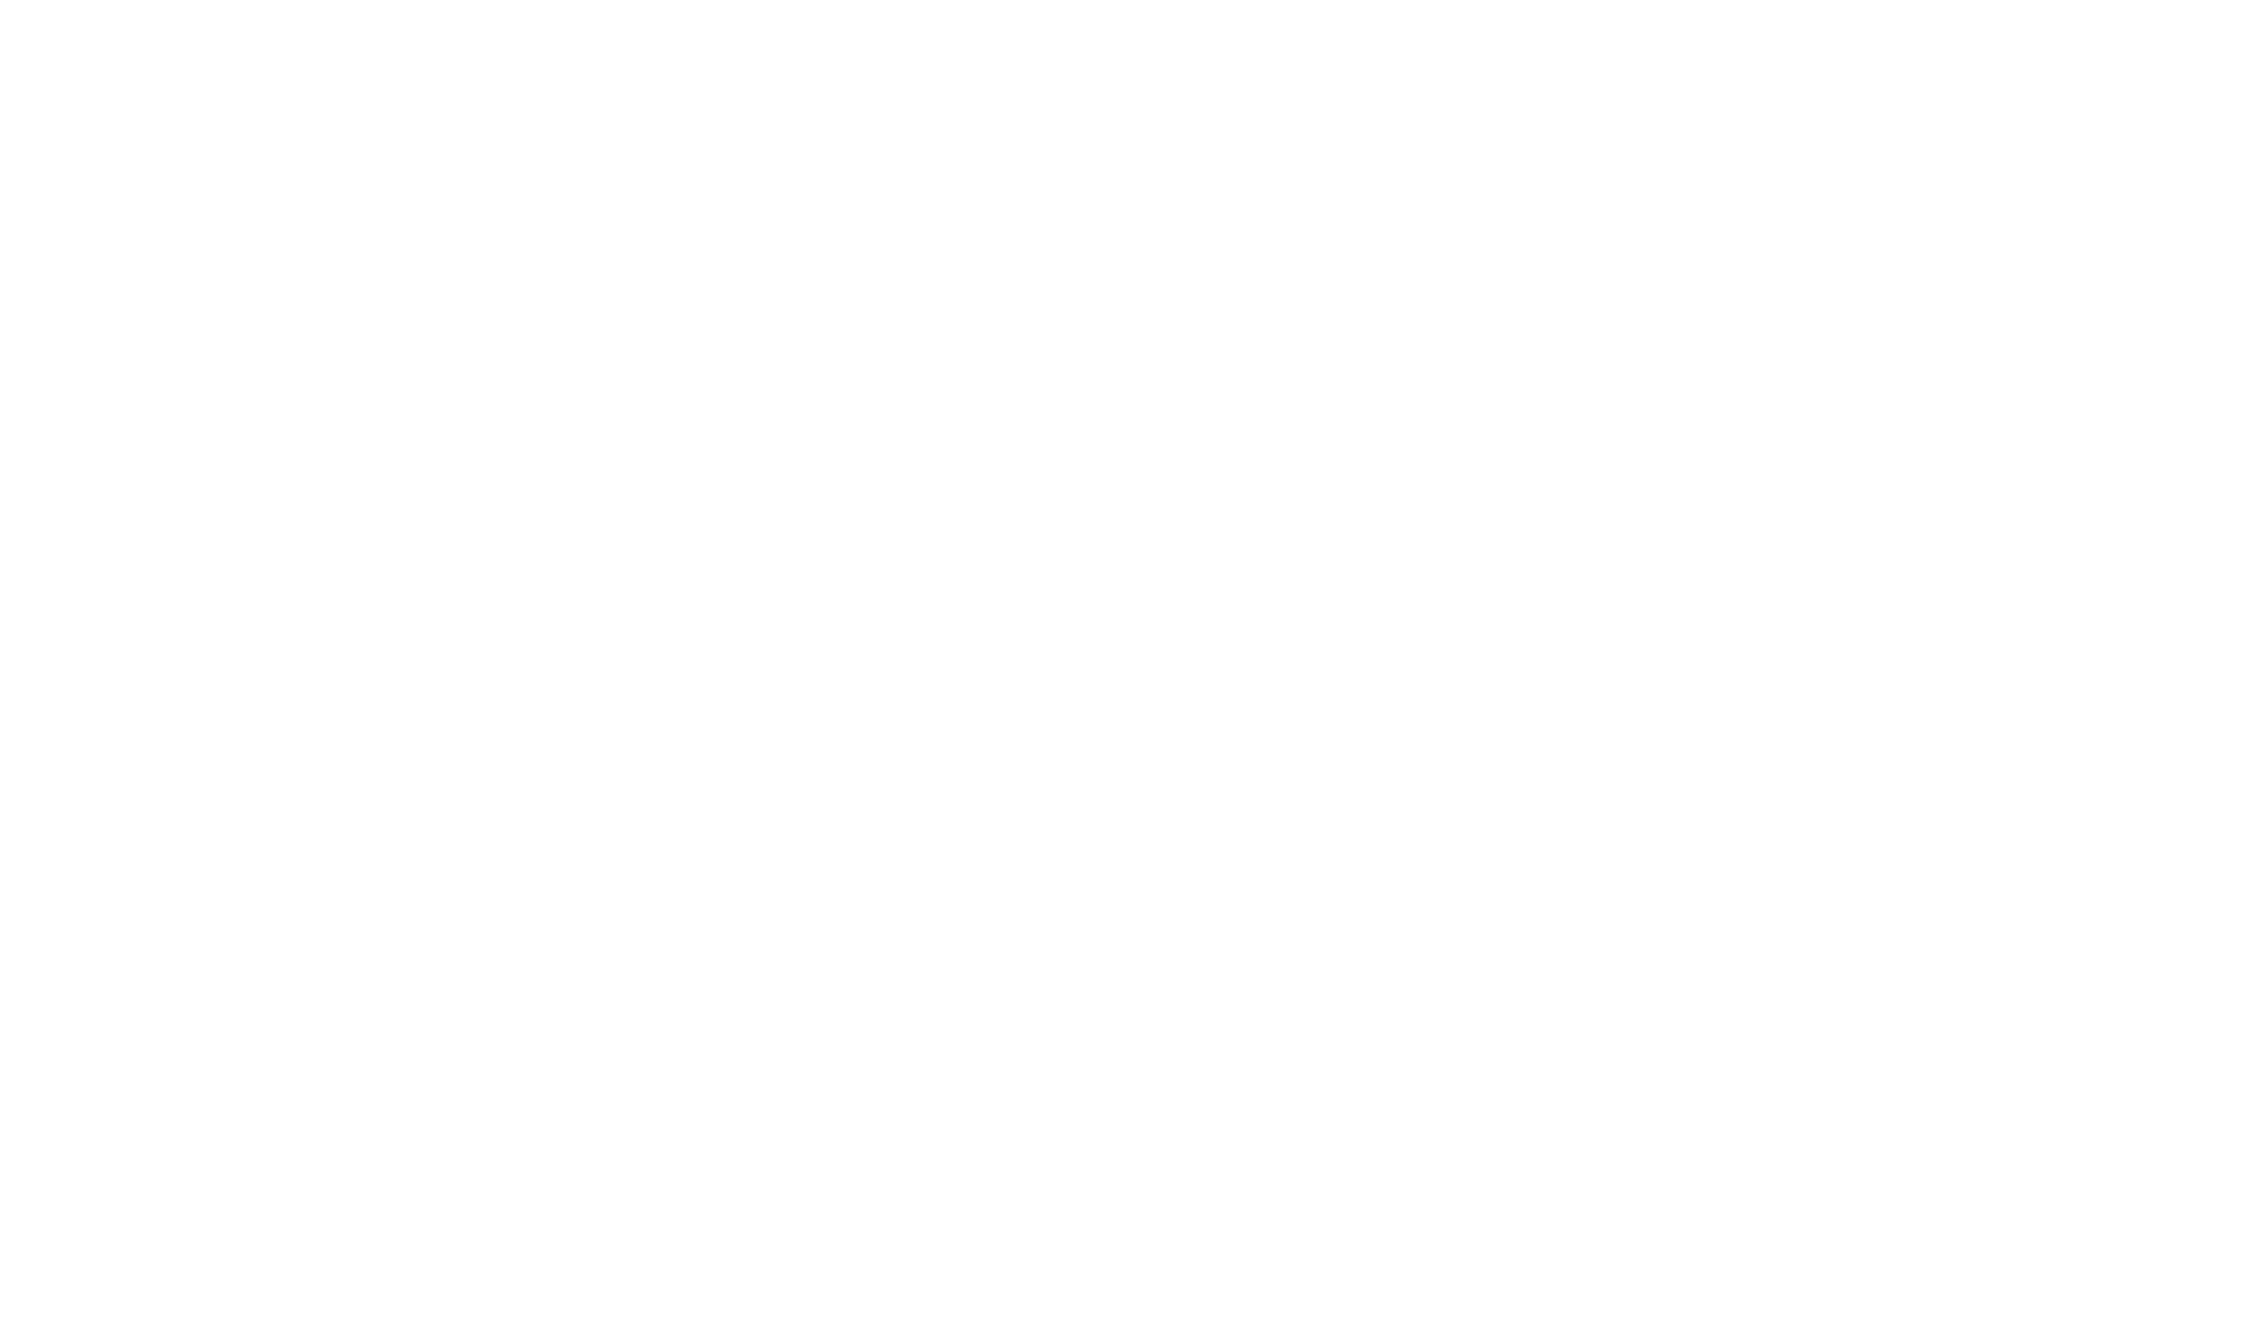 AllPack Services